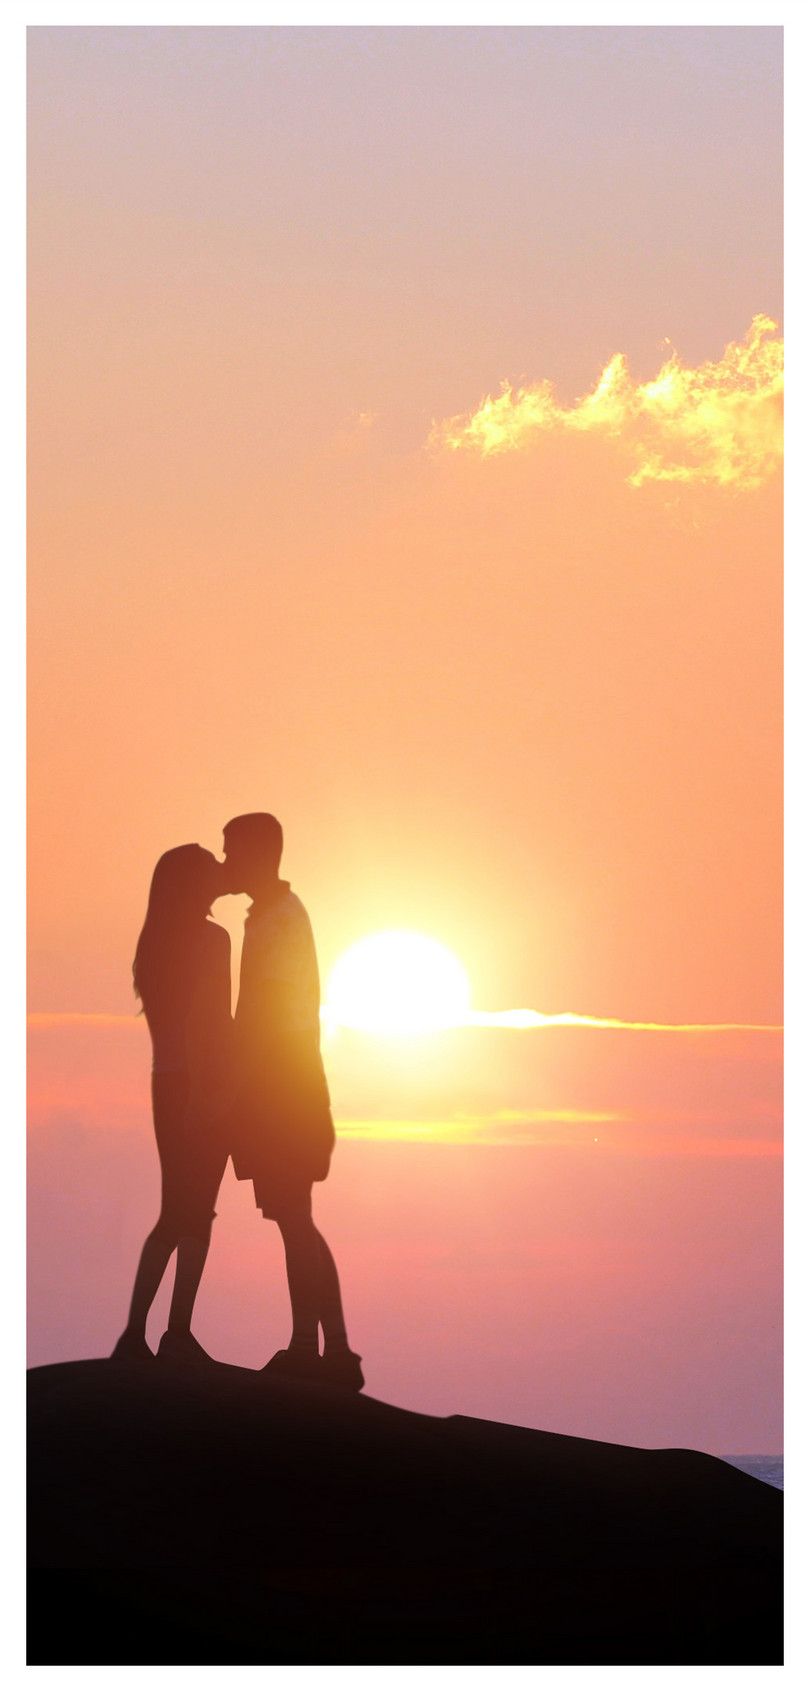 Sunset Couple Silhouette Cell Phone Wallpaper Background Image Free Download 400258725 Lovepik.com